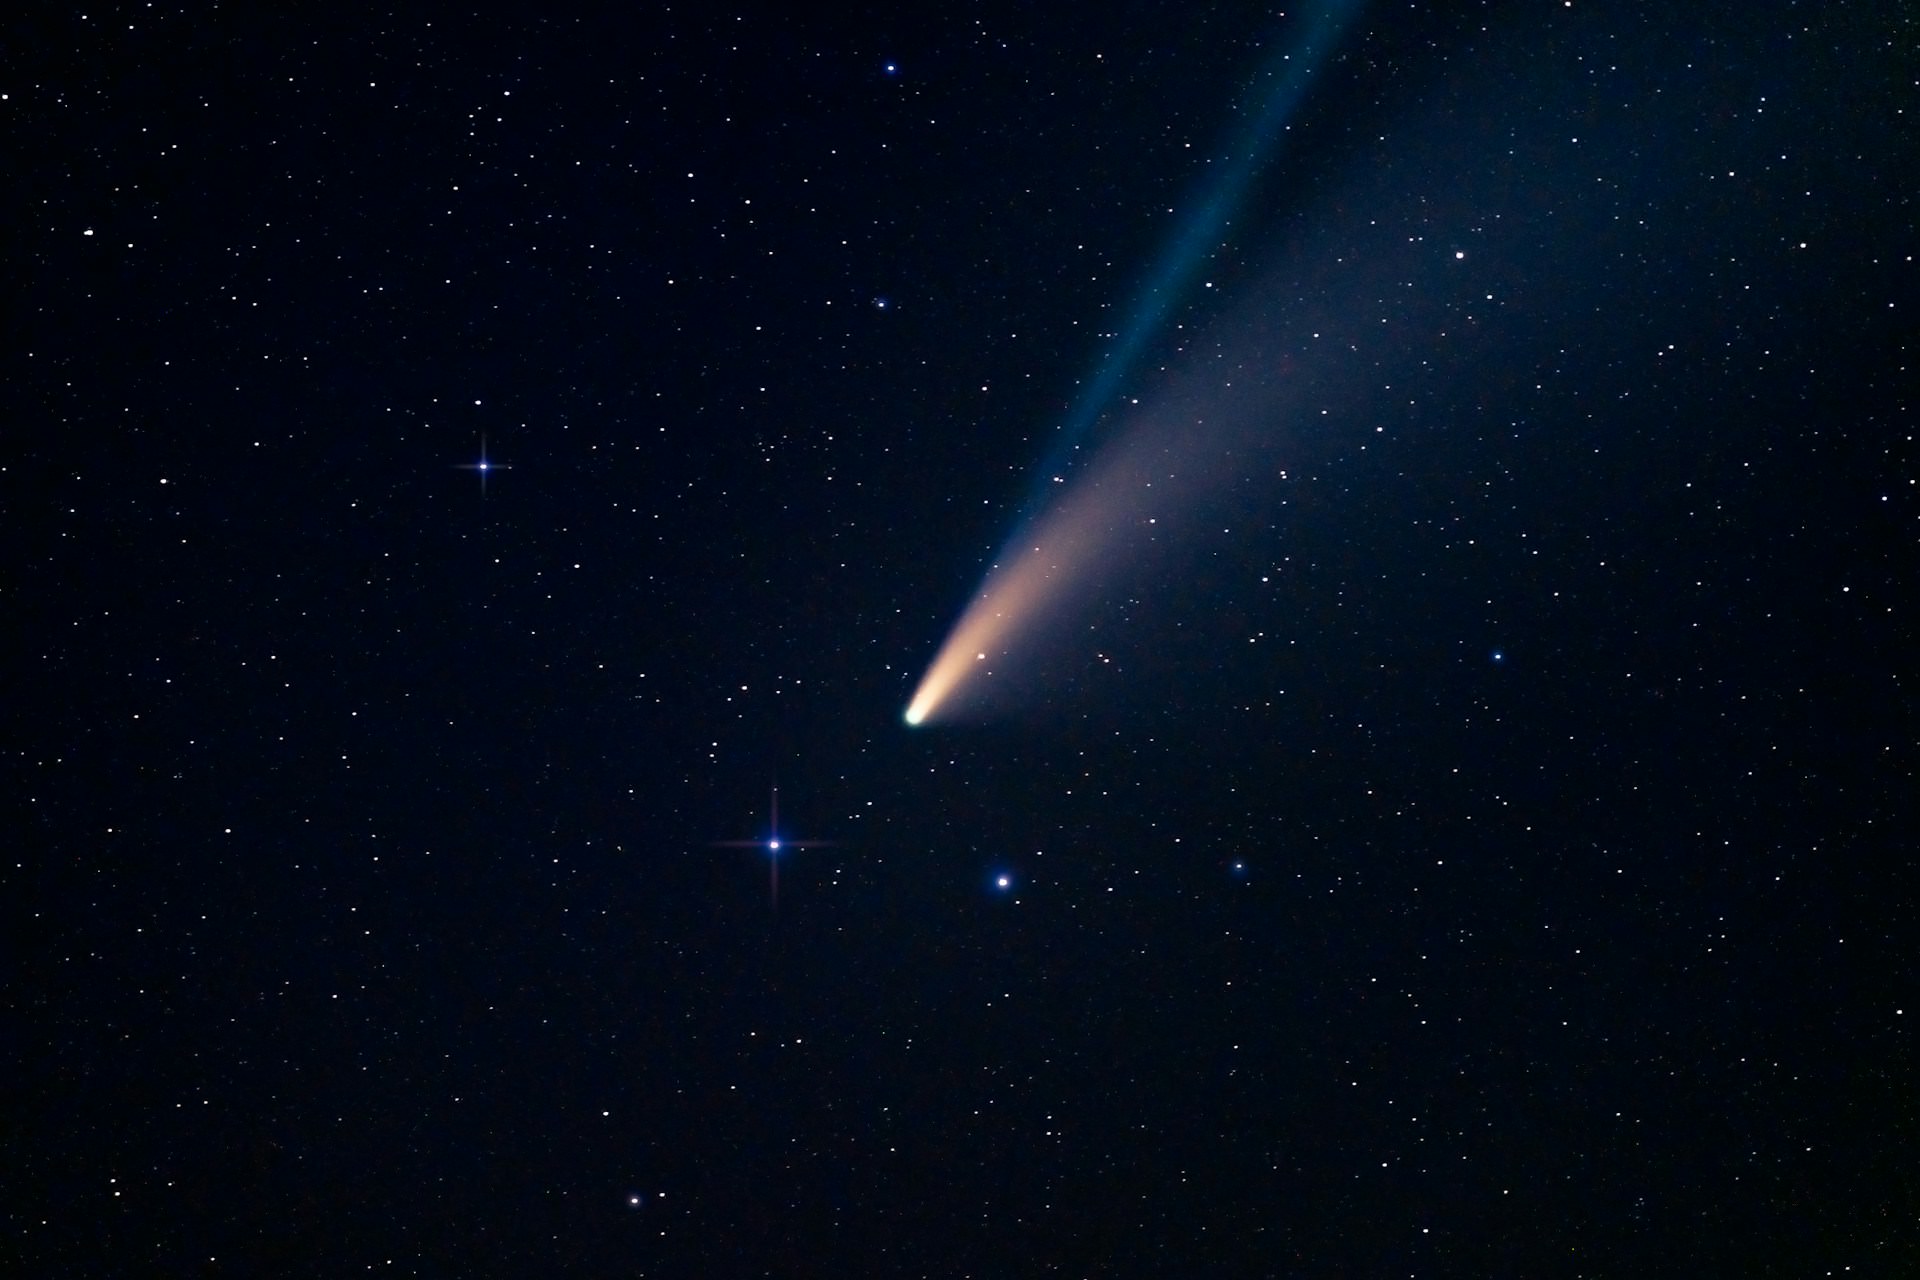 Comets may look beautiful streaking across the night sky, but they smell far from pleasant. Due to the presence of ammonia and hydrogen sulfide, these celestial bodies give off a foul odor reminiscent of rotten eggs and urine.